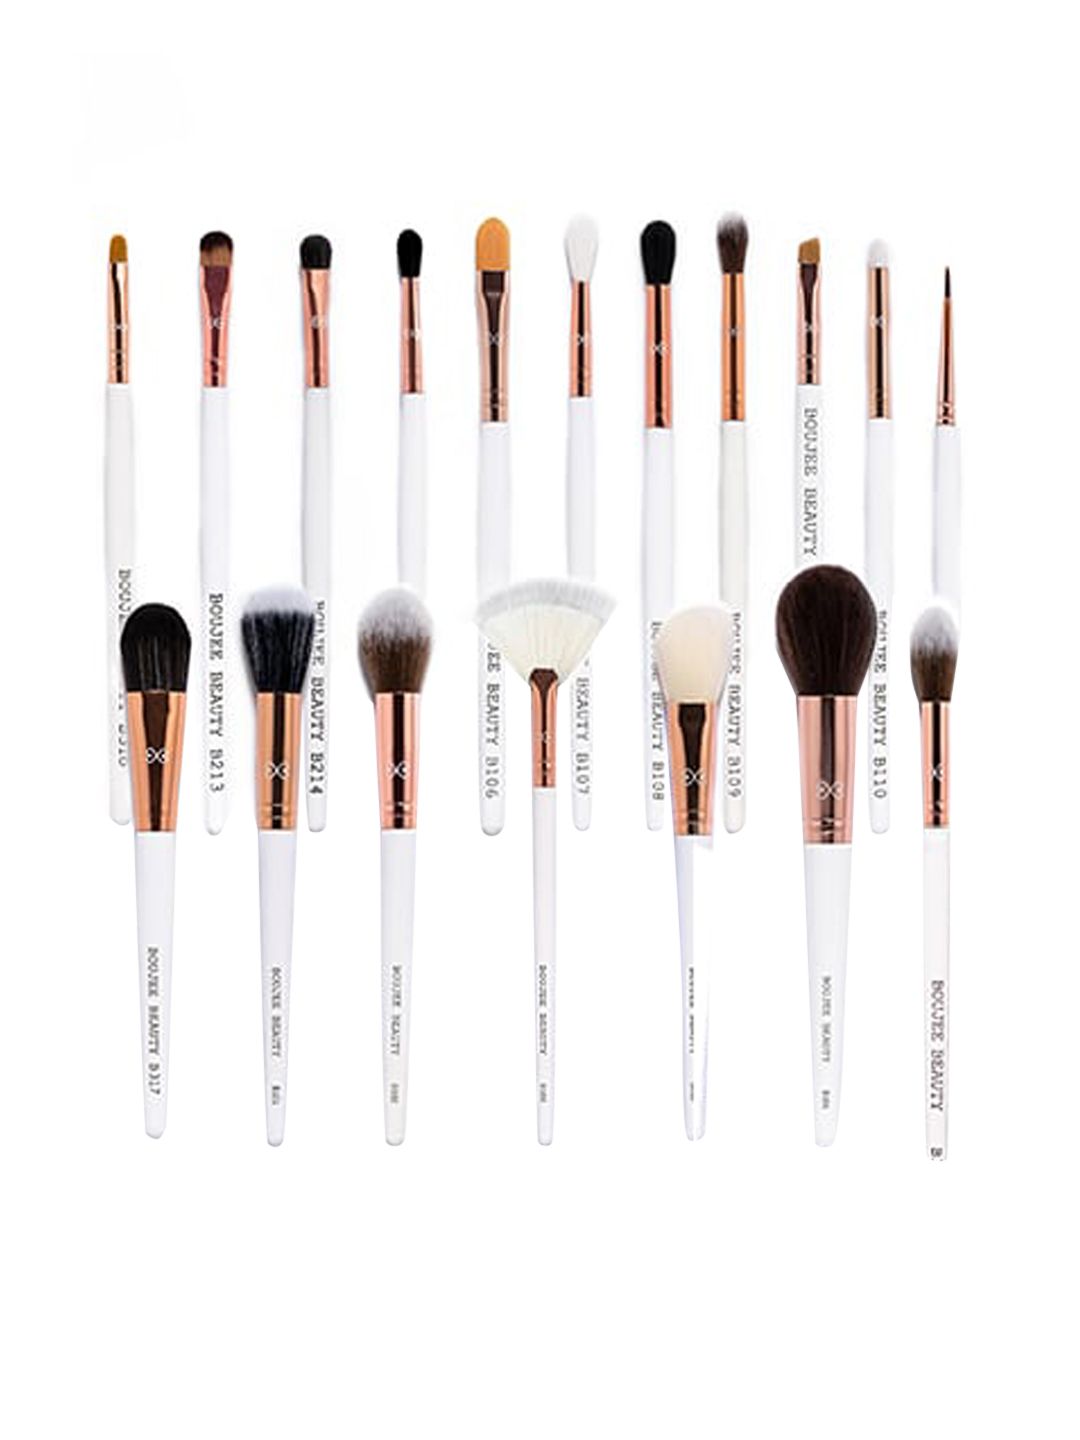 BOUJEE BEAUTY Set of 18 Professional Makeup Brush - S108 Price in India